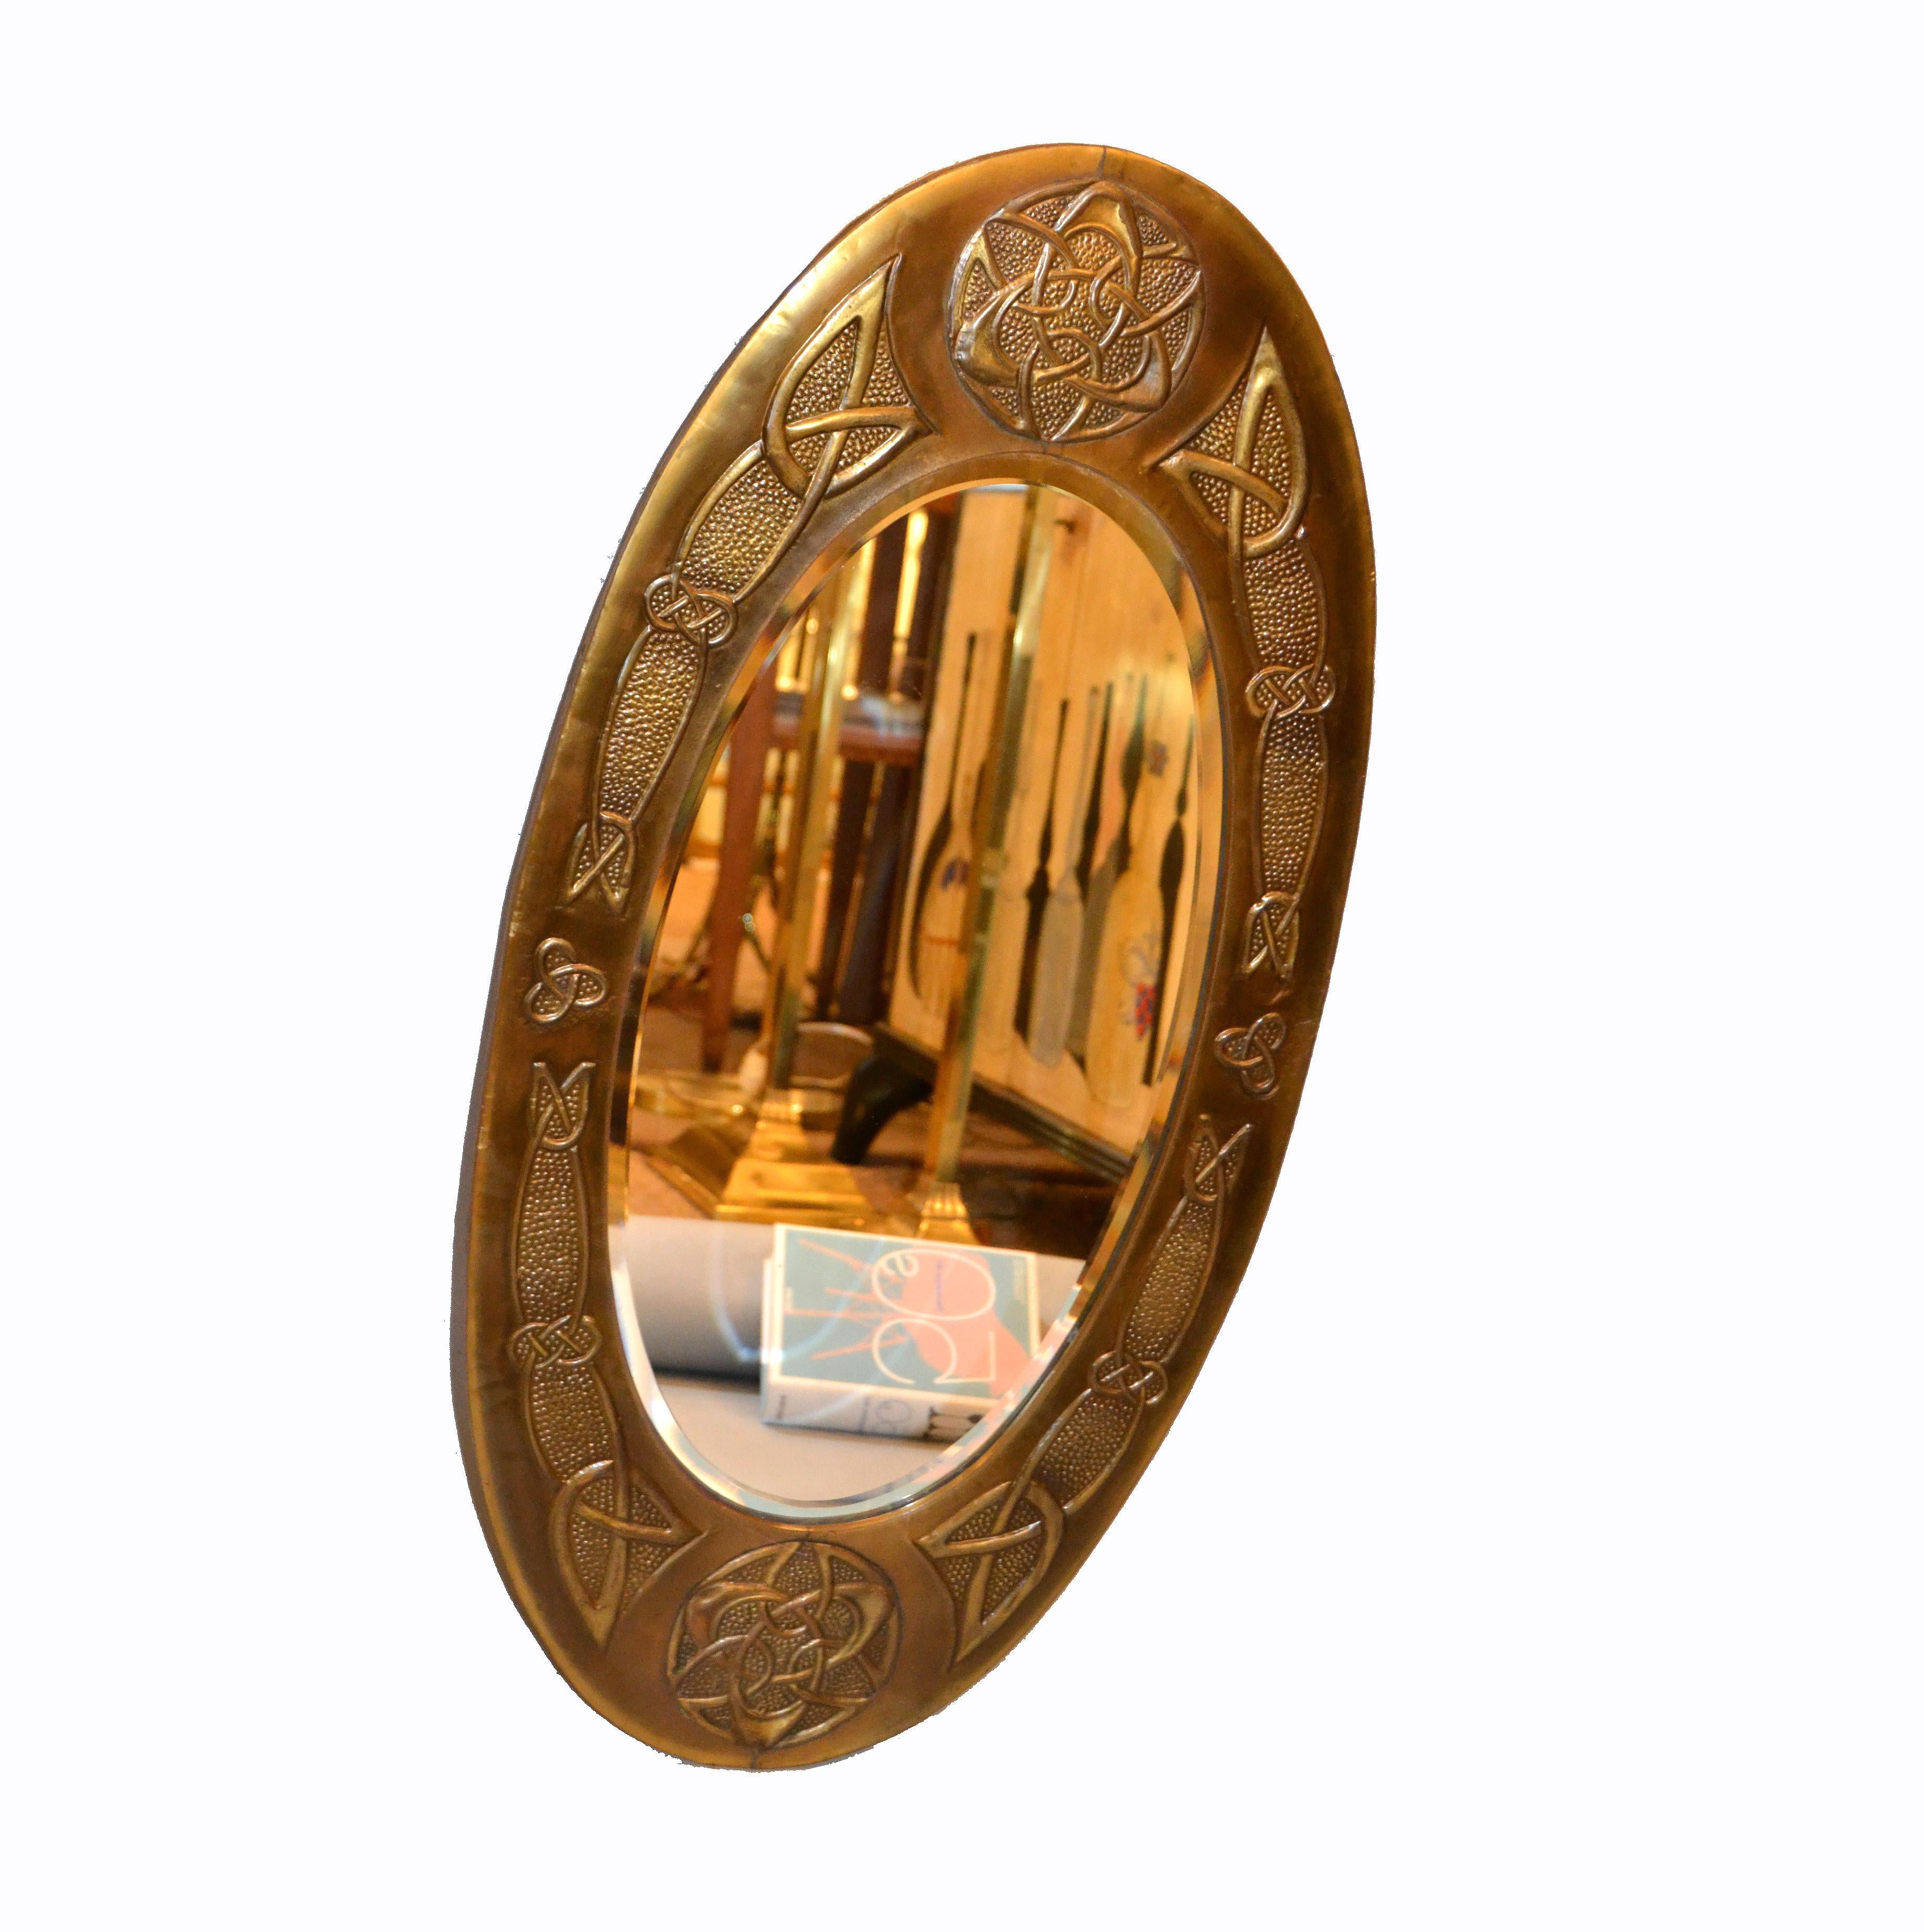 Arts and Crafts oval bronze mirror with detailed Celtic ornamentation and wooden backing.
This Design was made circa 1910 in the UK.
The mirror is beveled.
